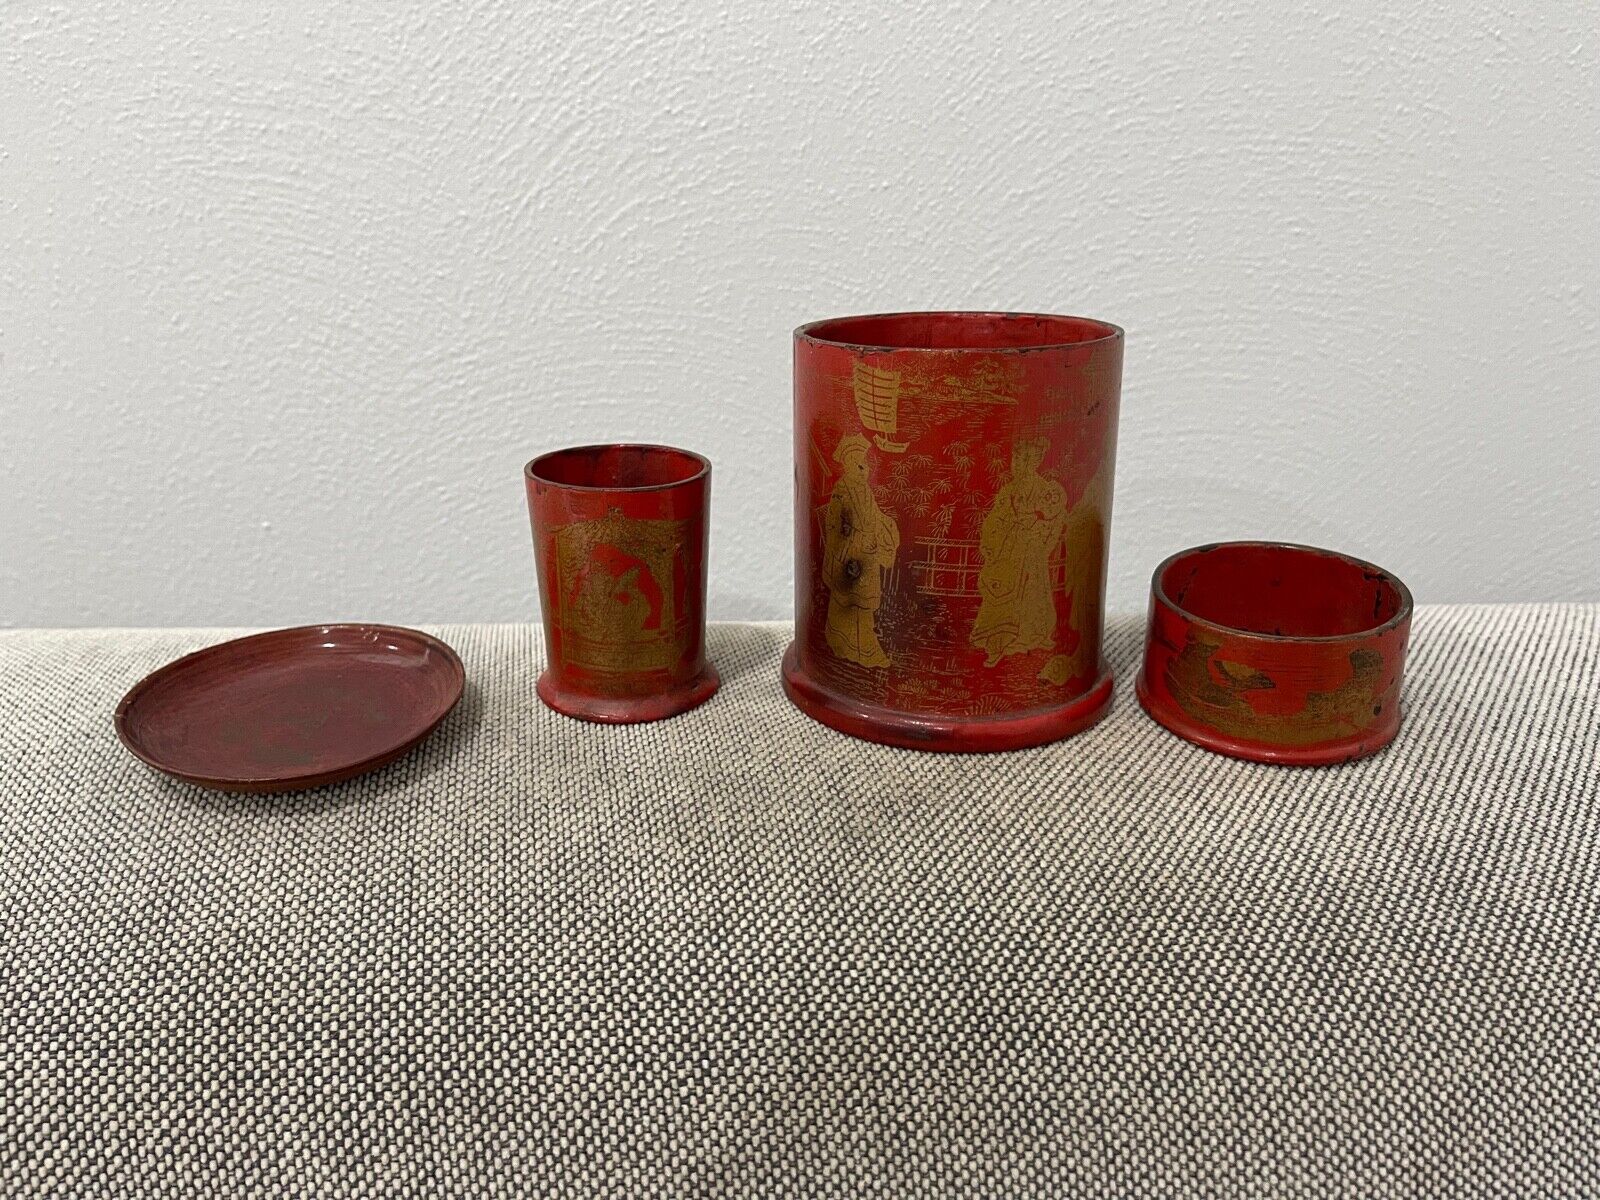 Antique Group of 4 Chinese or Japanese Lacquer Dishes w/ Figures Decoration